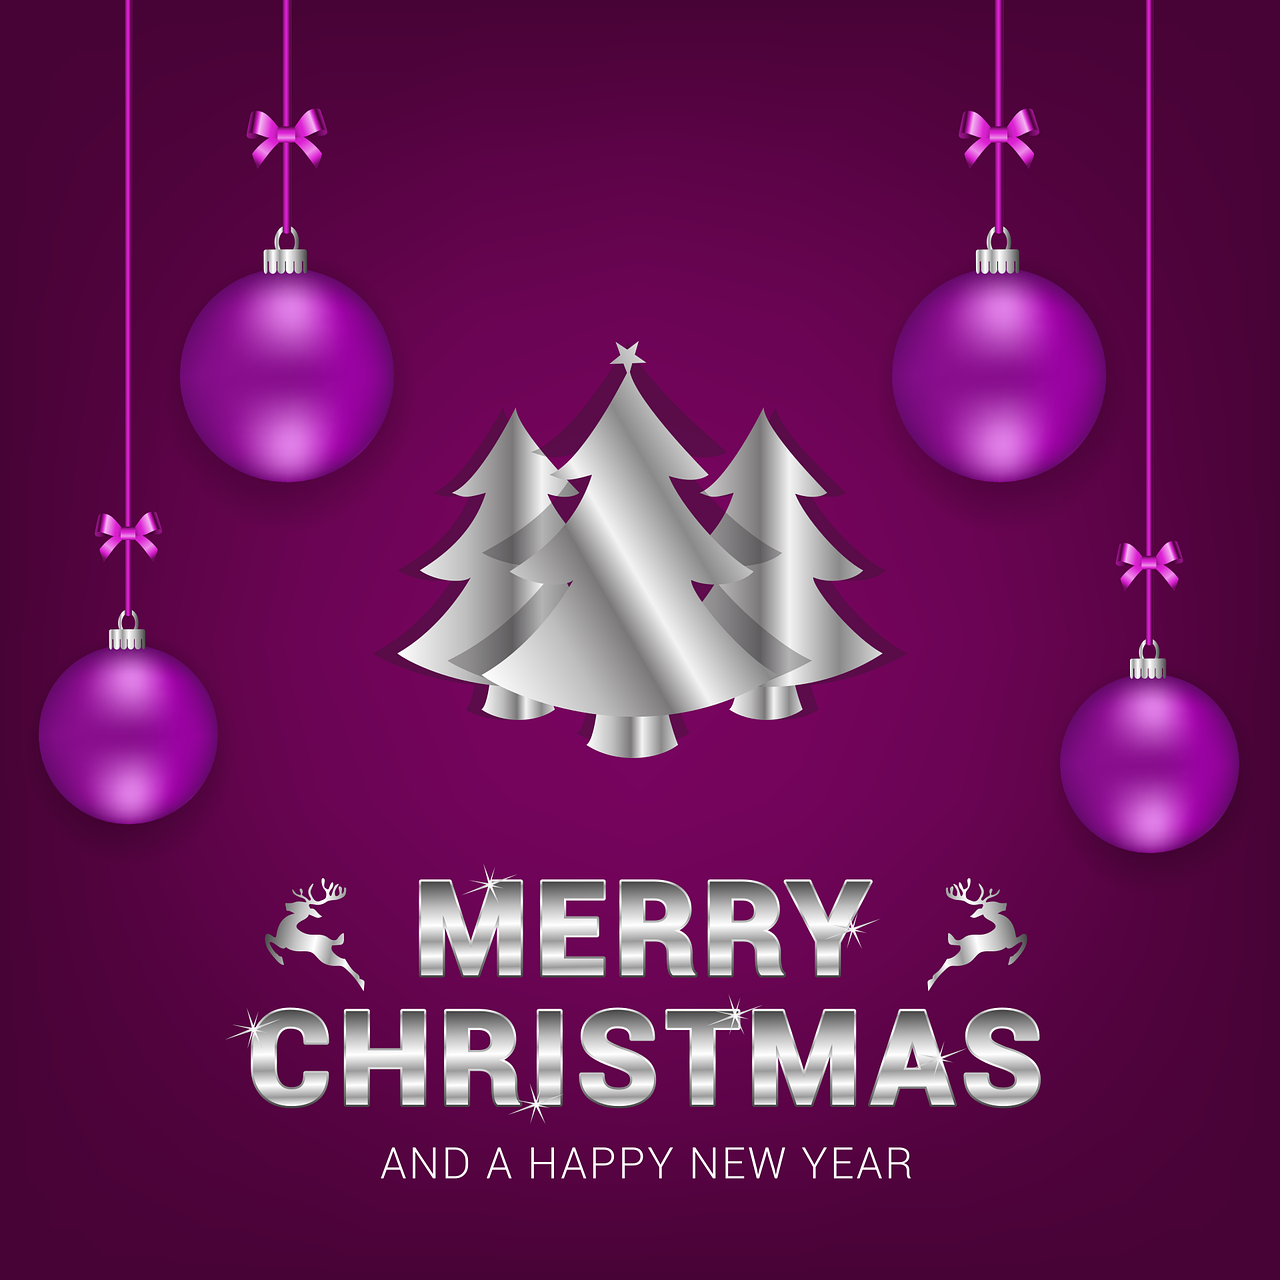 merry christmas and a happy new year, a photo, art deco, background is purple, realistic detailed background, silver ornaments, poster illustration